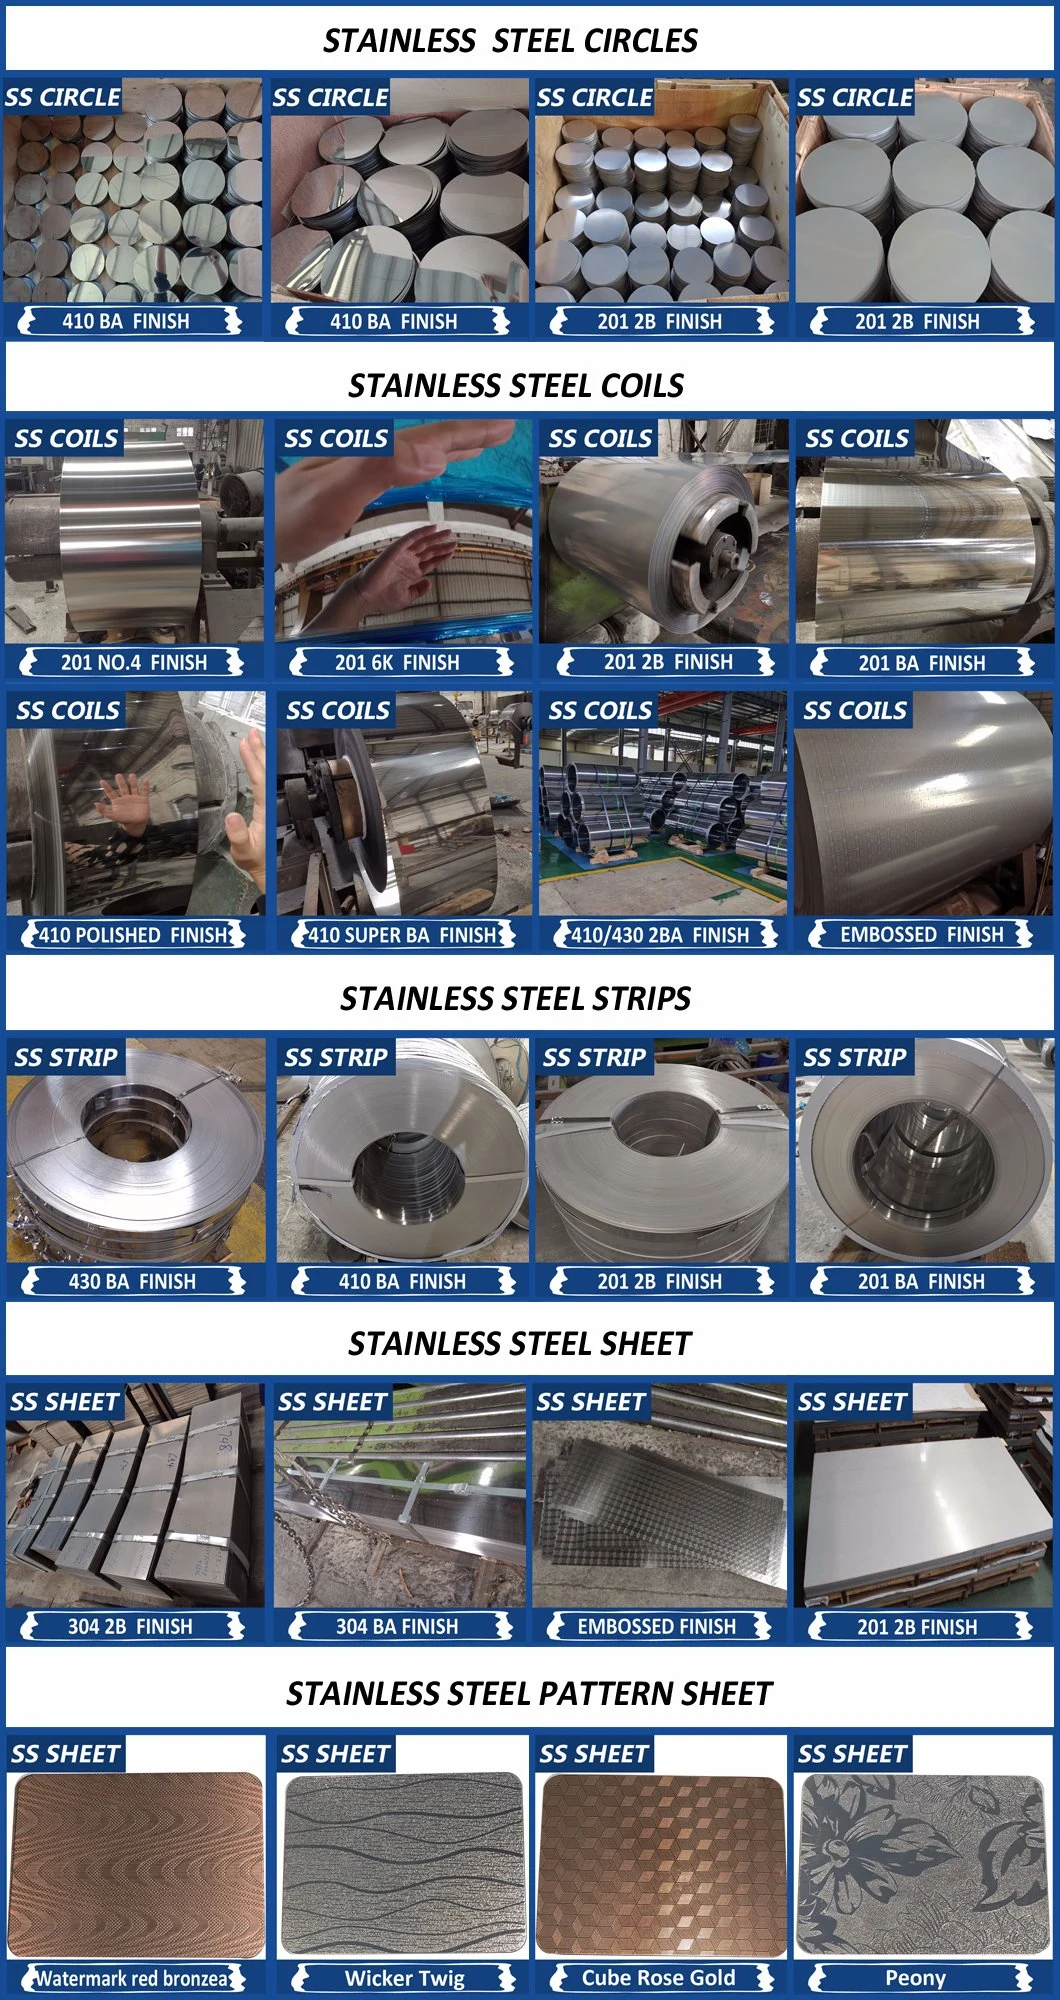 Cold Rolled Stainless Steel Sheet/Plate with Thickness 0.15 - 0.3 mm